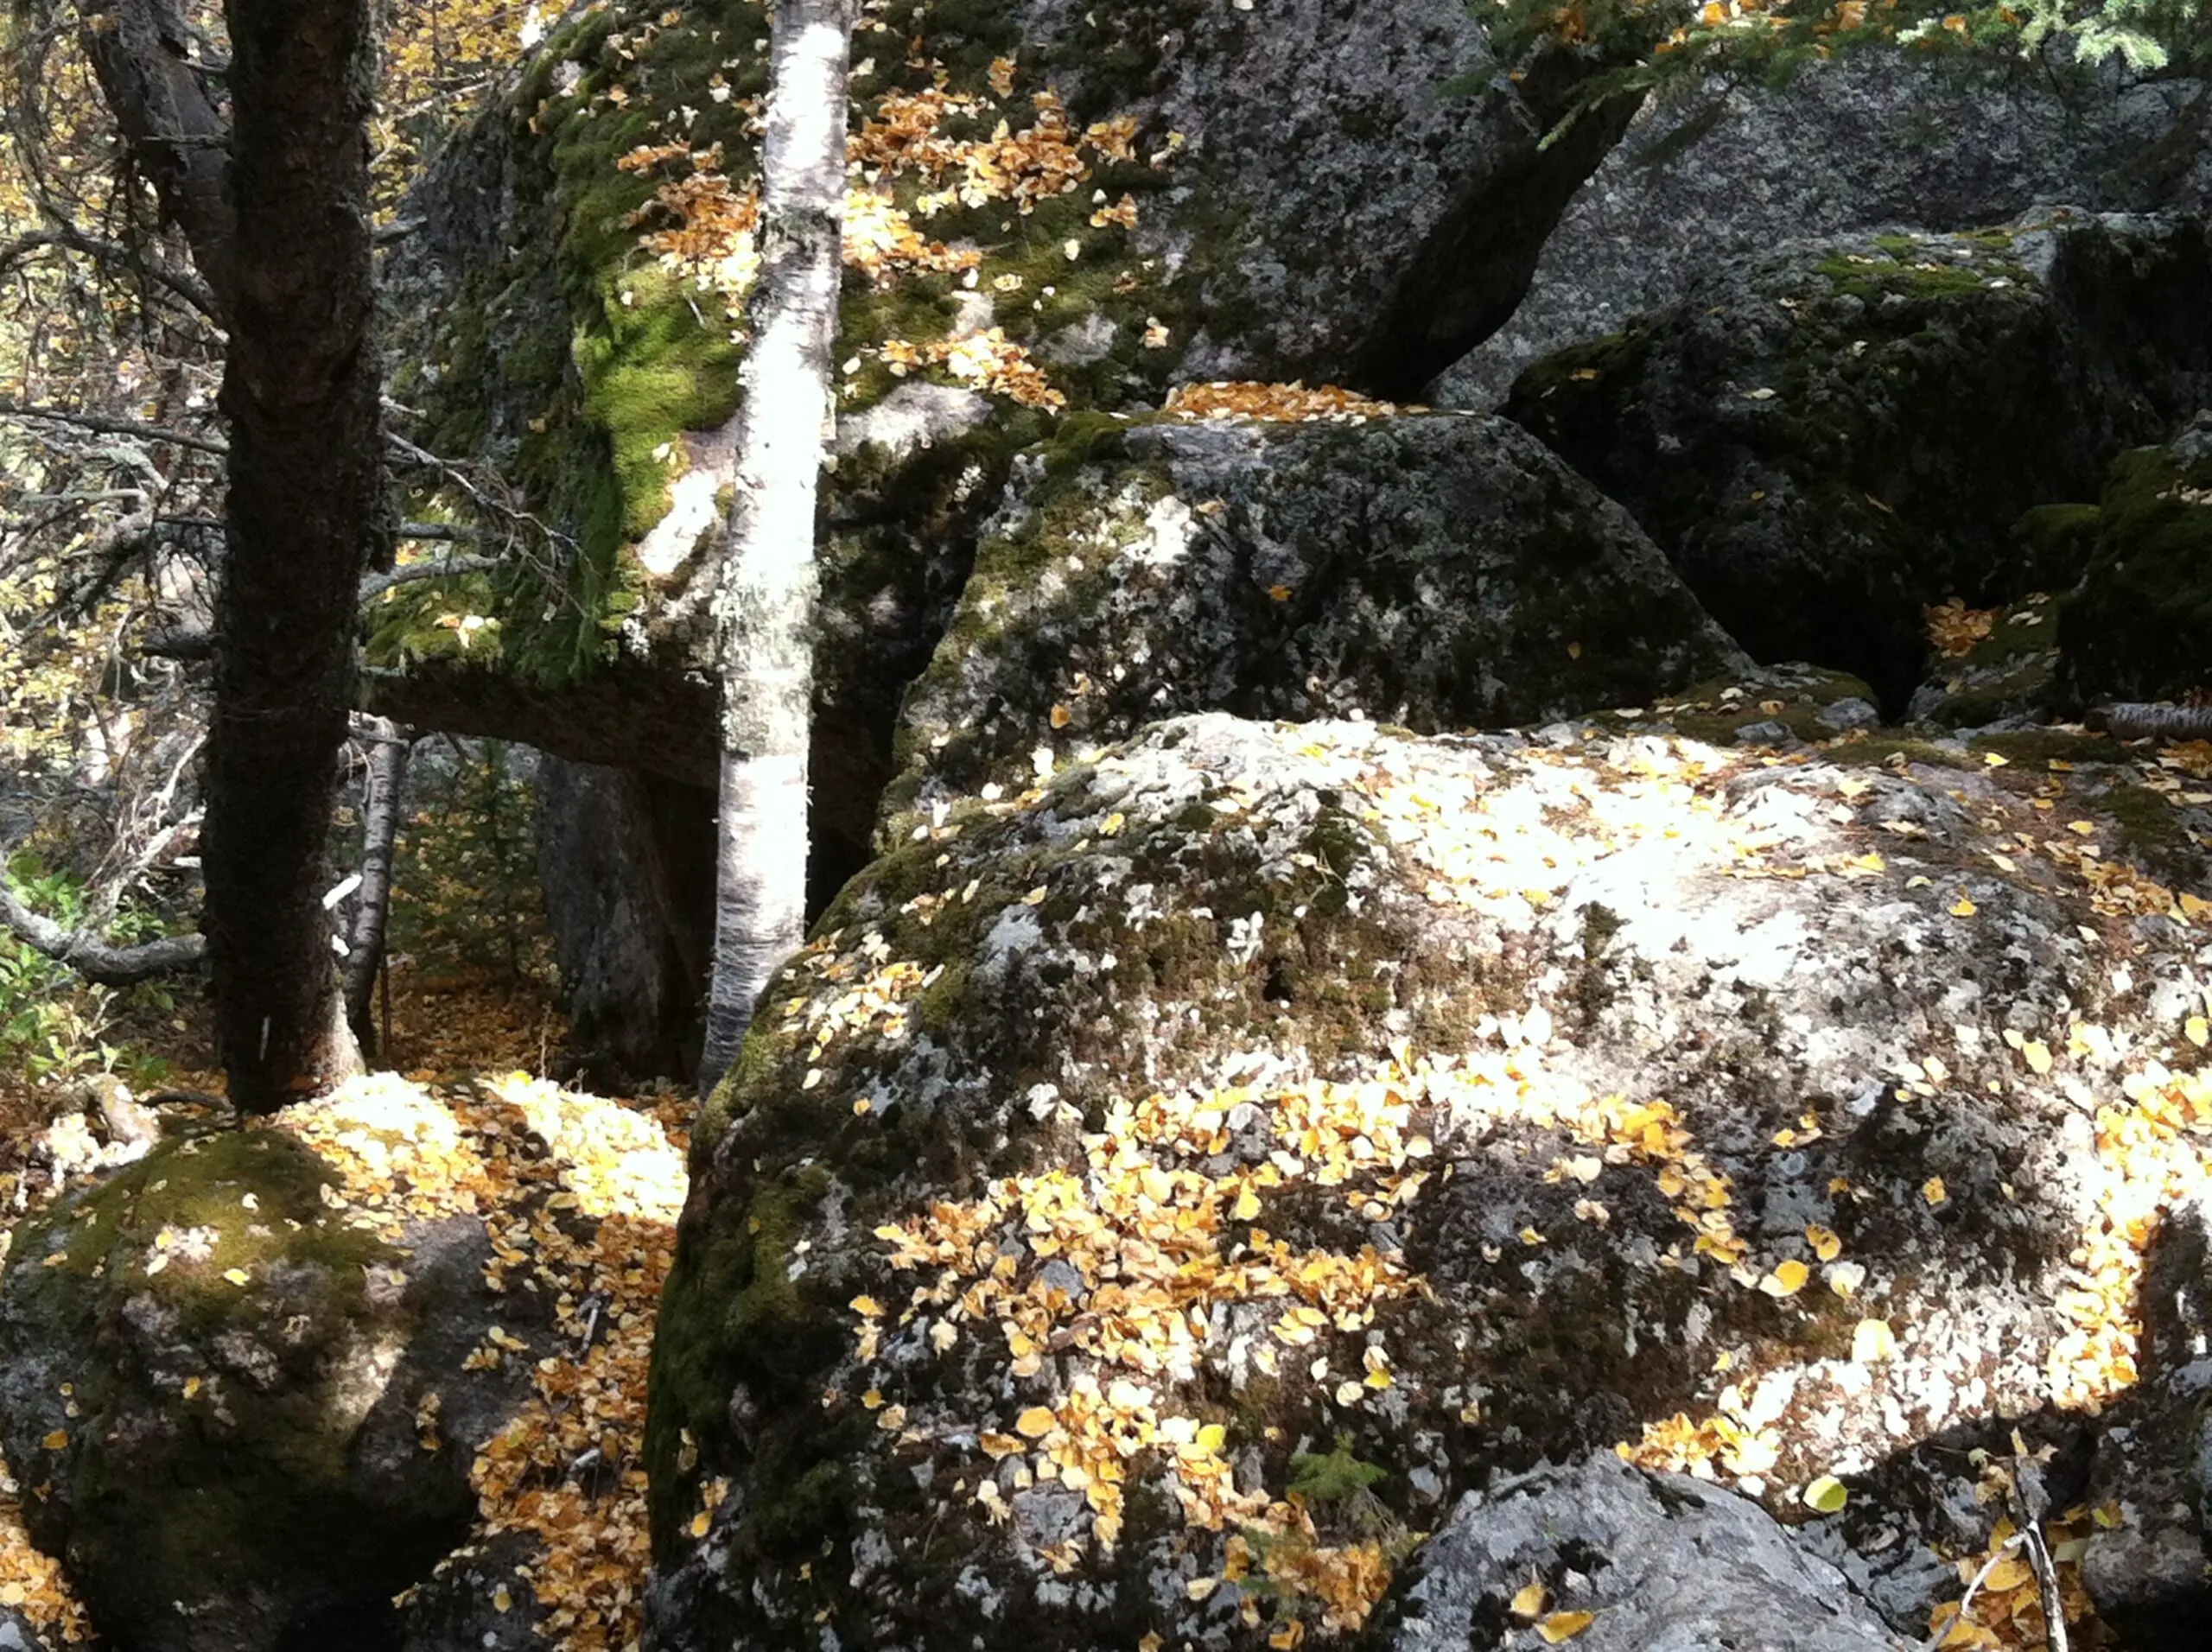 Moss and yellow-leaf covered boulders dappled in sunlight with tree trunks coming out of them